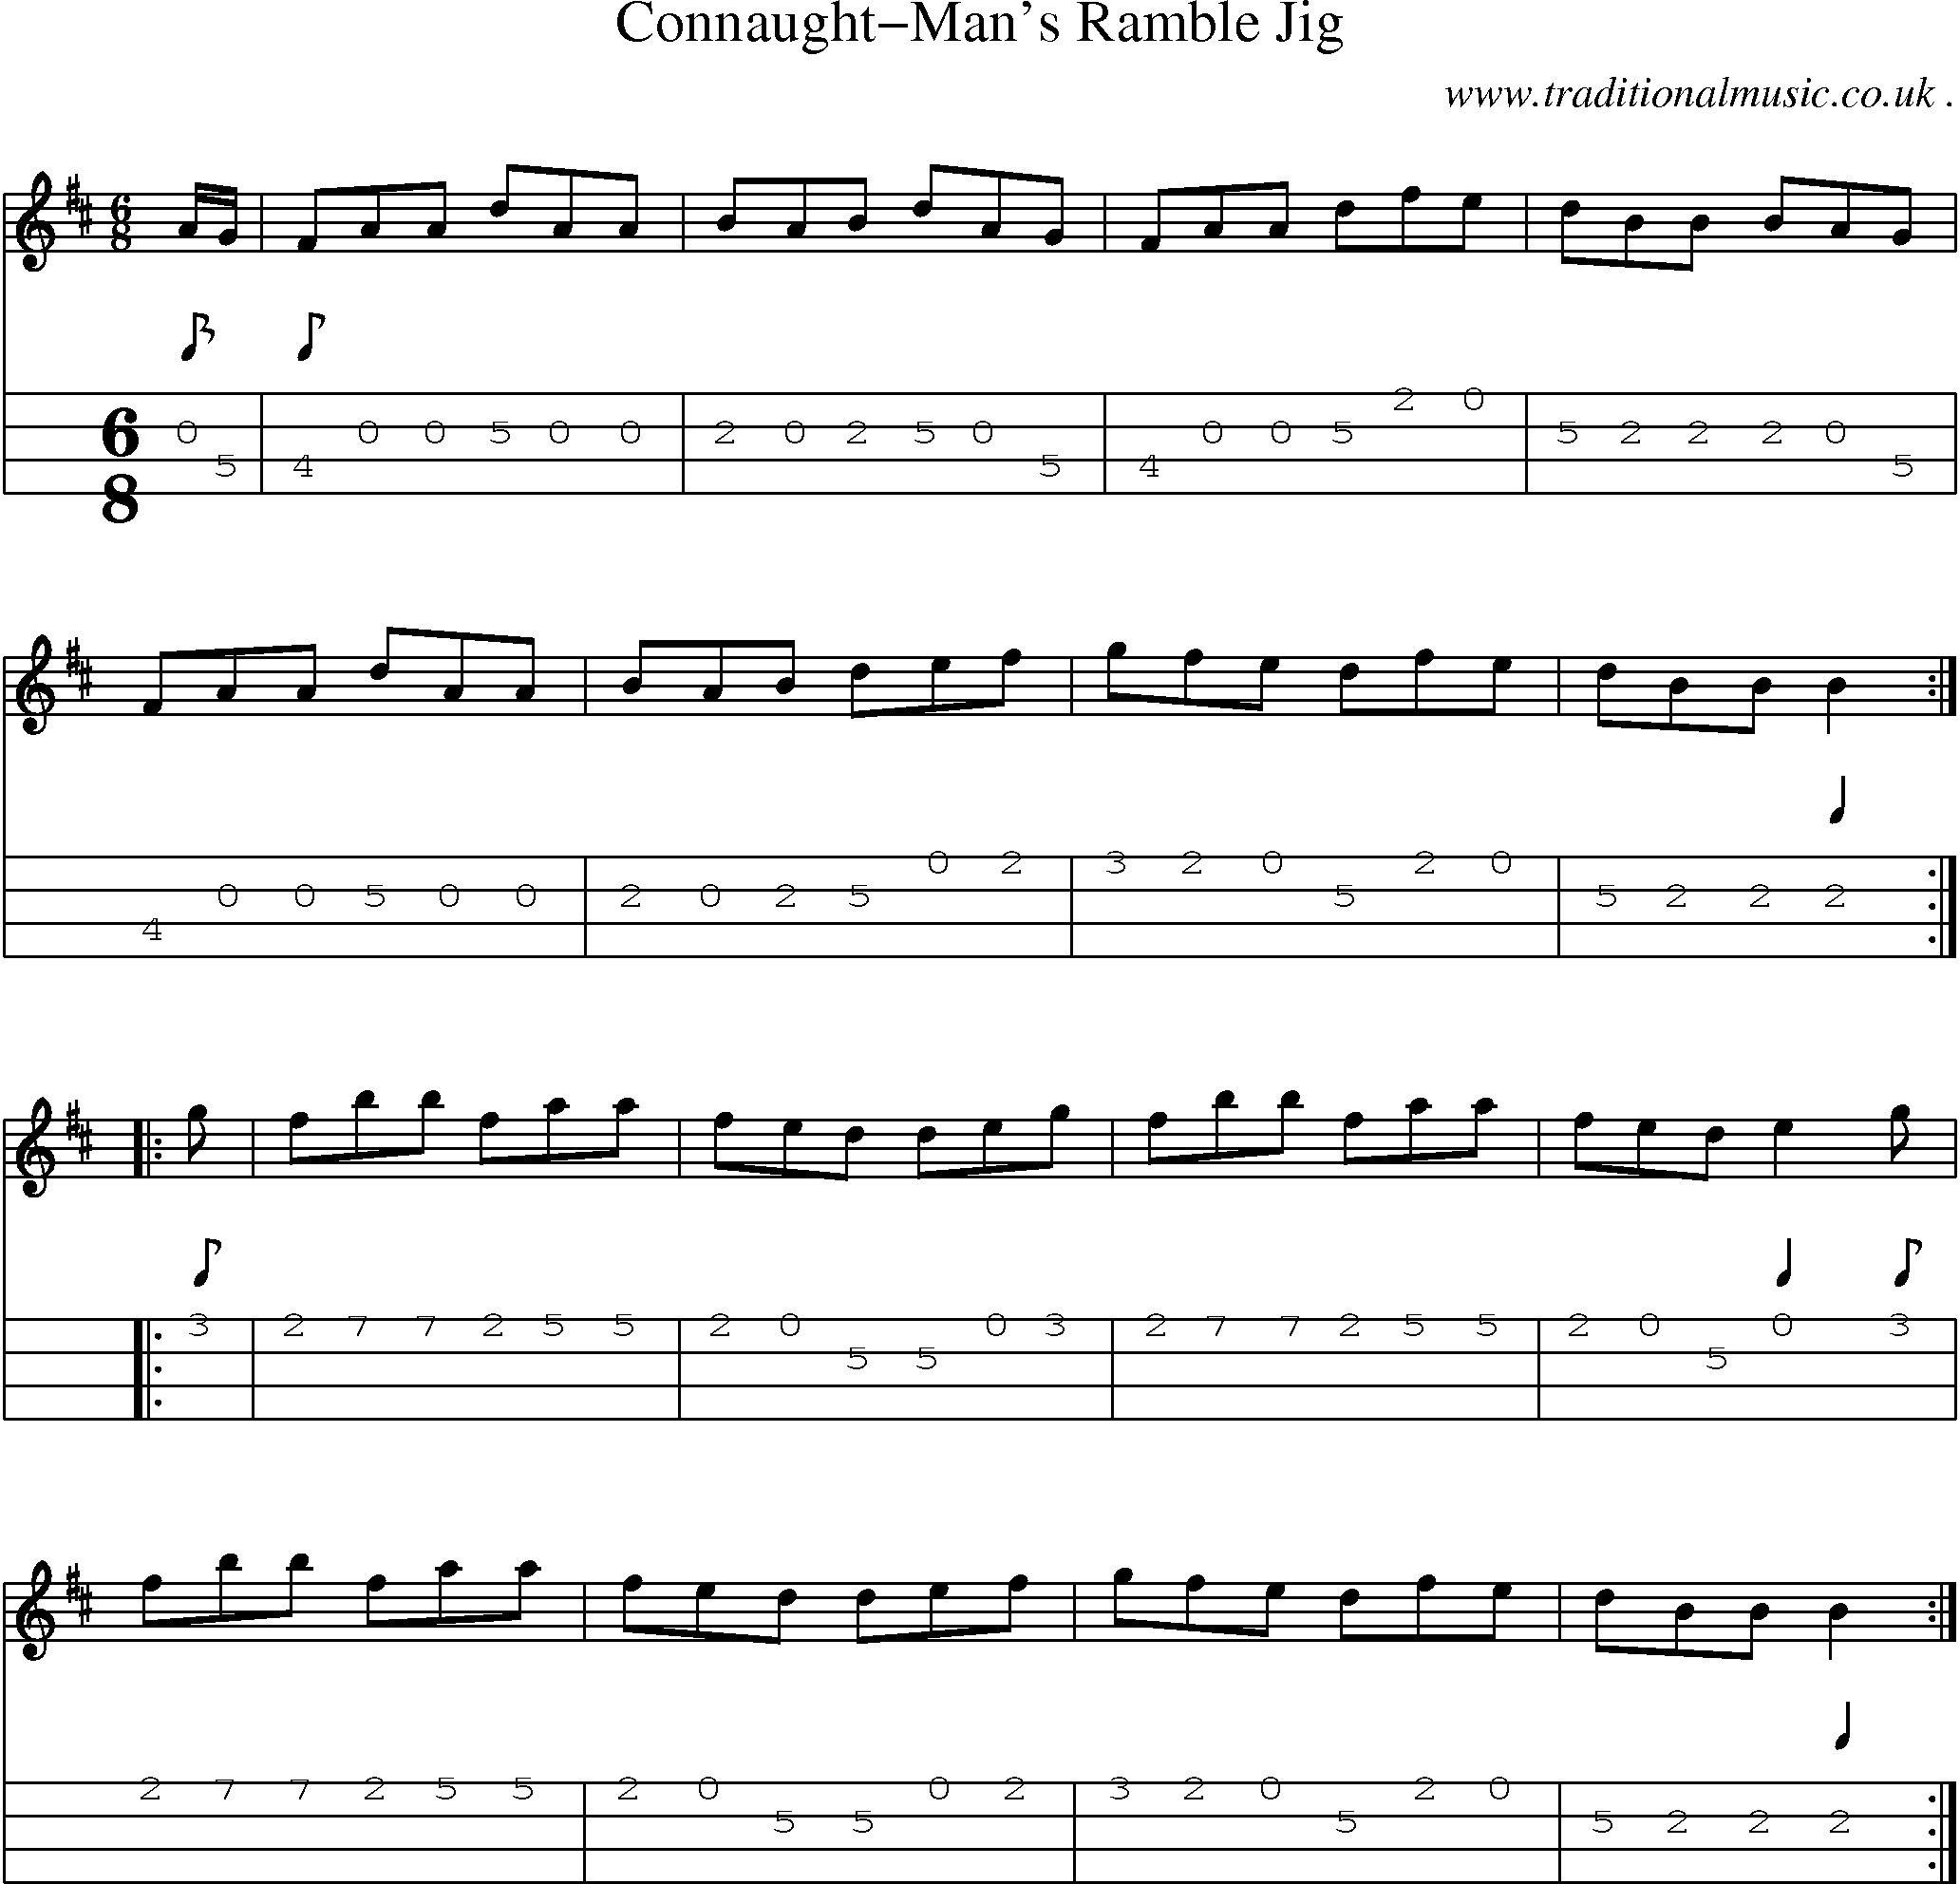 Sheet-Music and Mandolin Tabs for Connaught-mans Ramble Jig